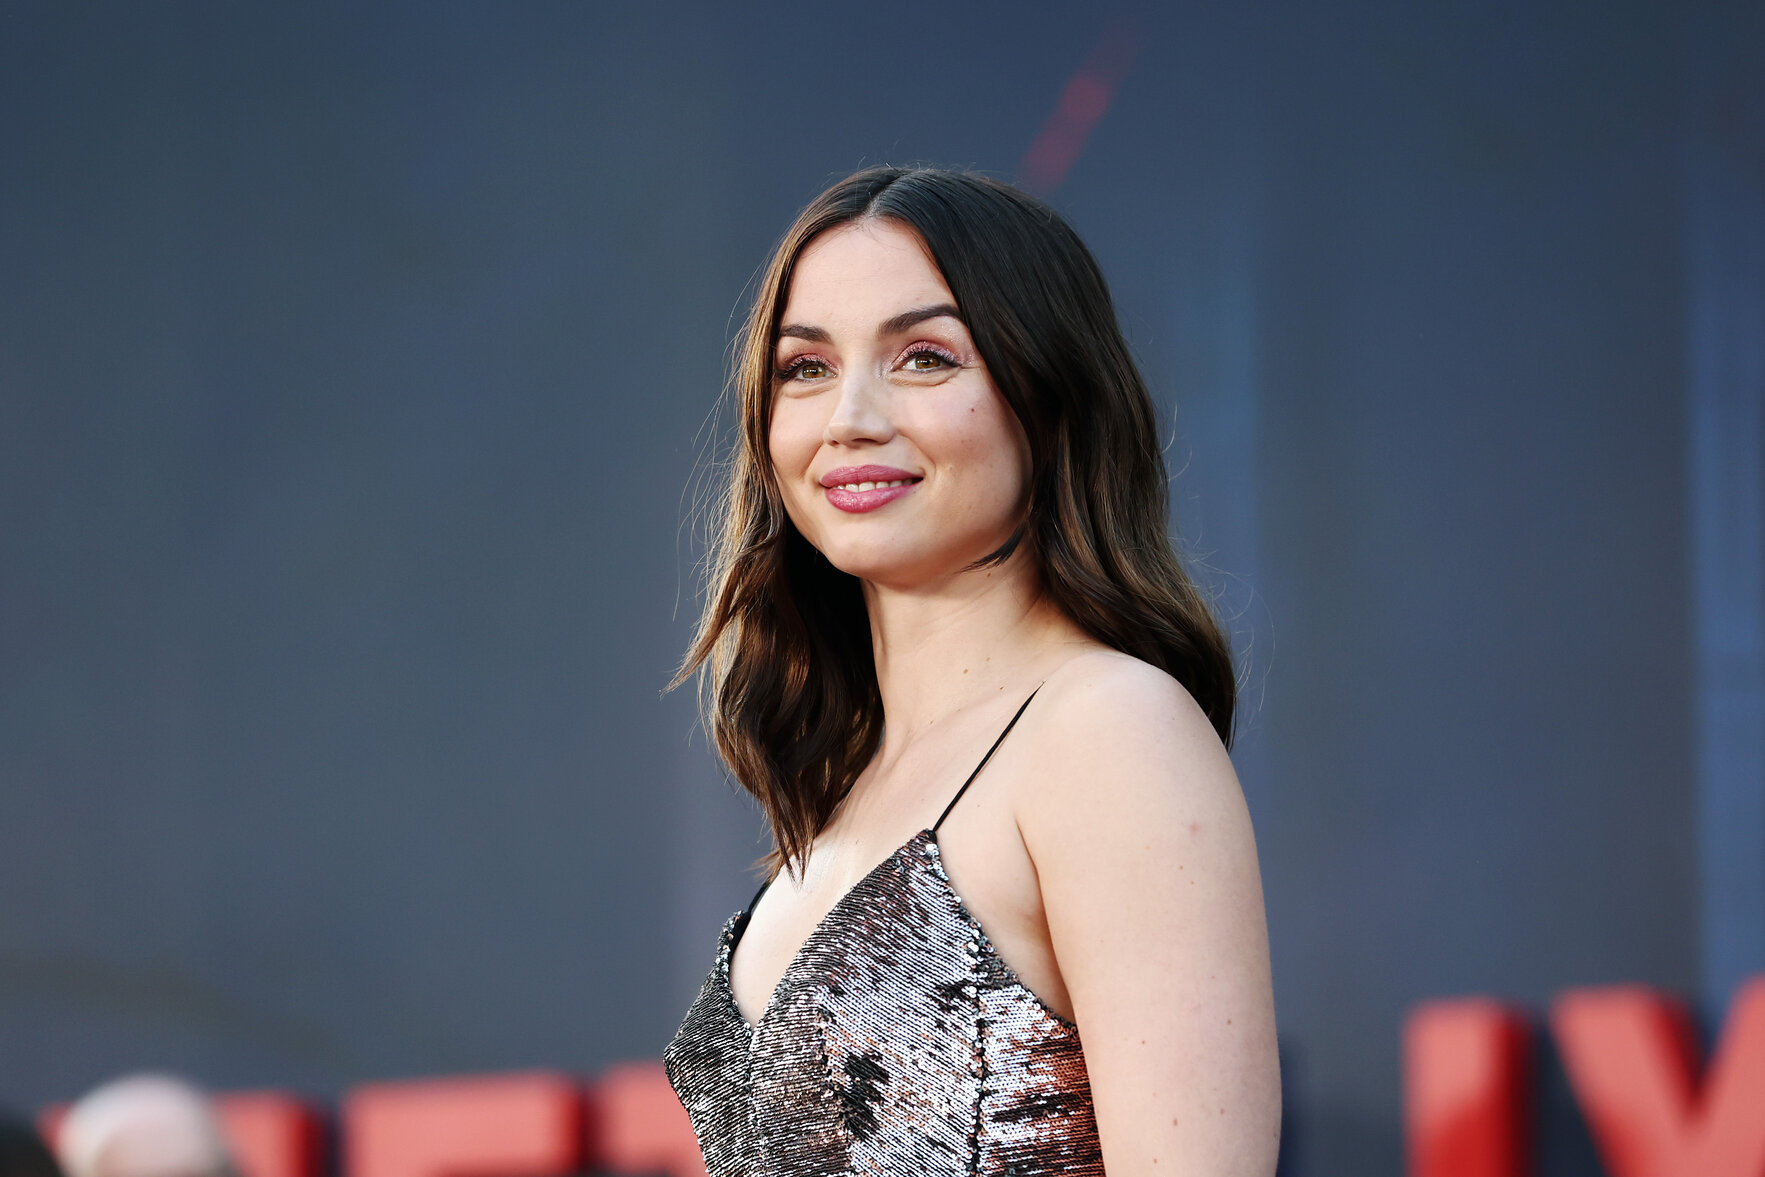 Ana de Armas lands next movie role in thriller with Marvel stars